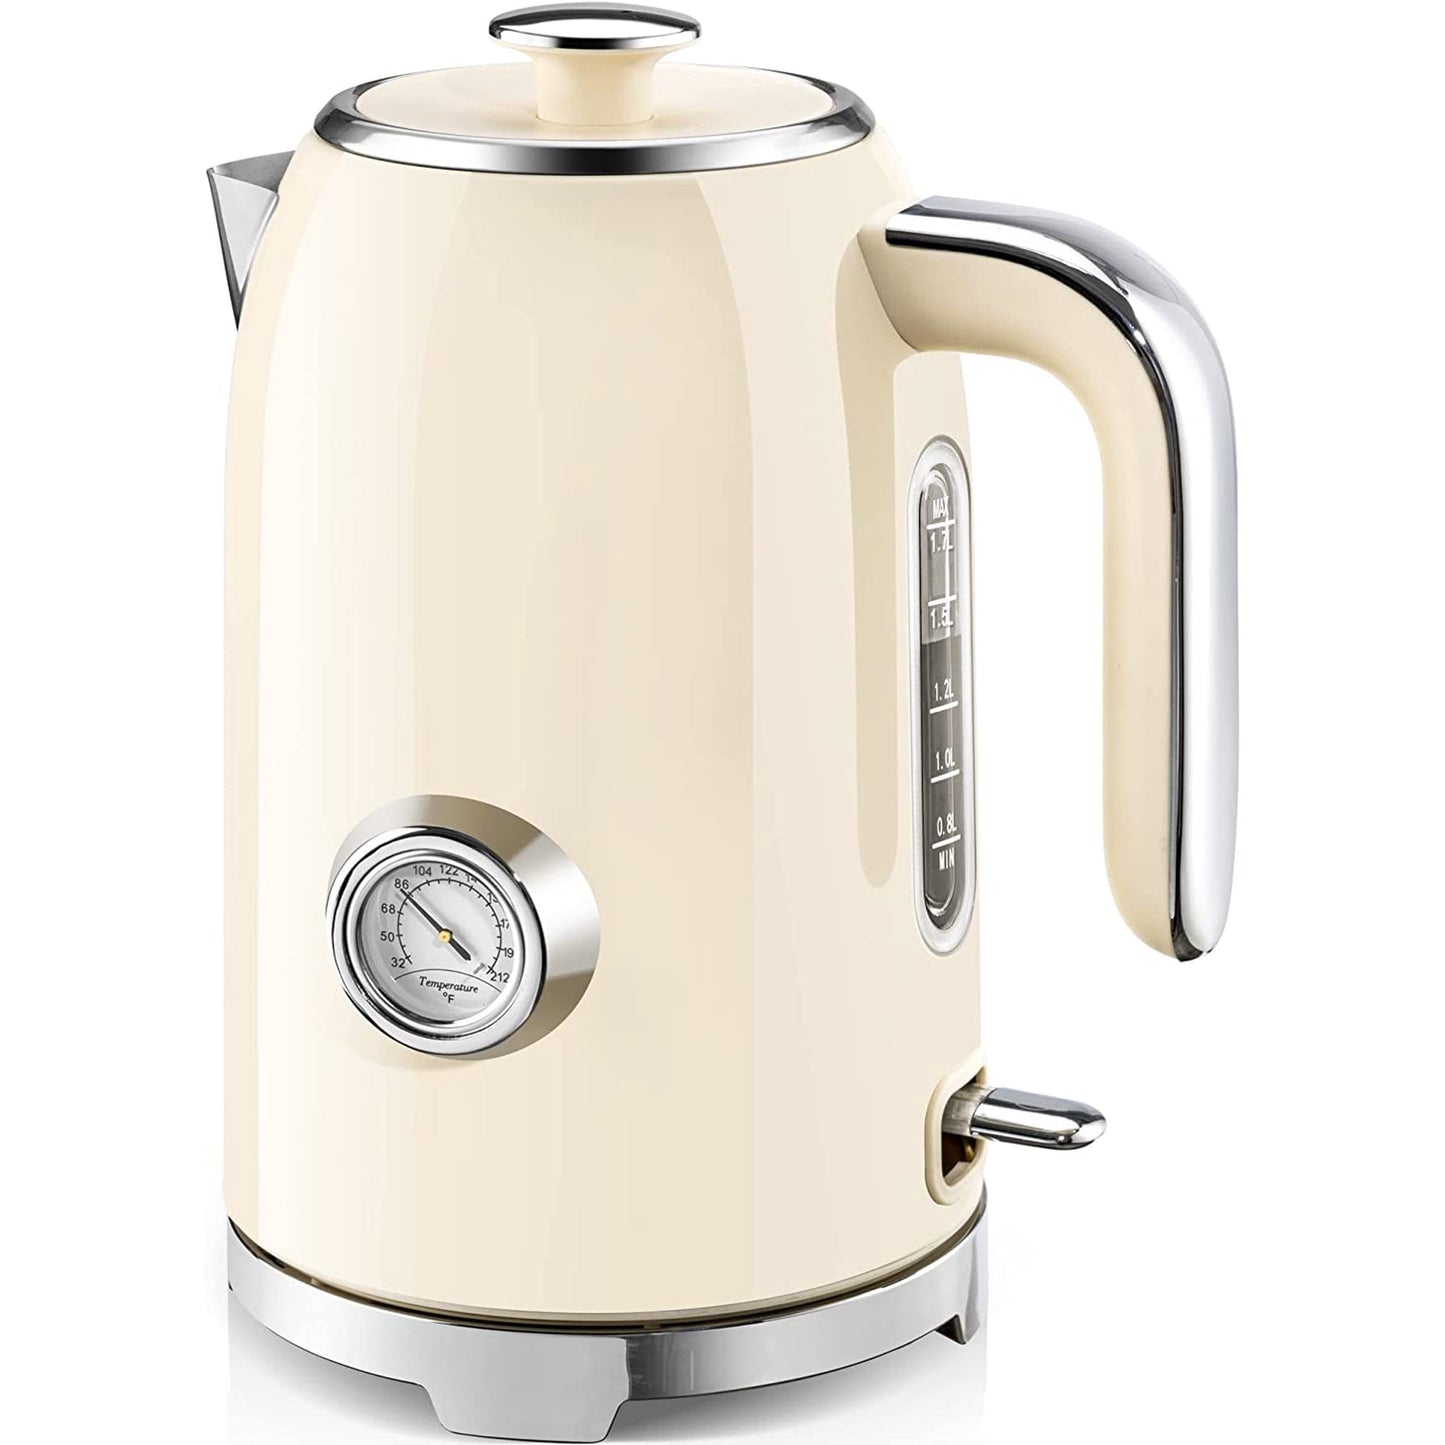 SUSTEAS Electric Kettle - 57oz Hot Tea Kettle Water Boiler with Thermometer, 1500W Fast Heating Stainless Steel Tea Pot, Cordless with LED Indicator, Auto Shut-Off & Boil Dry Protection, Retro Green